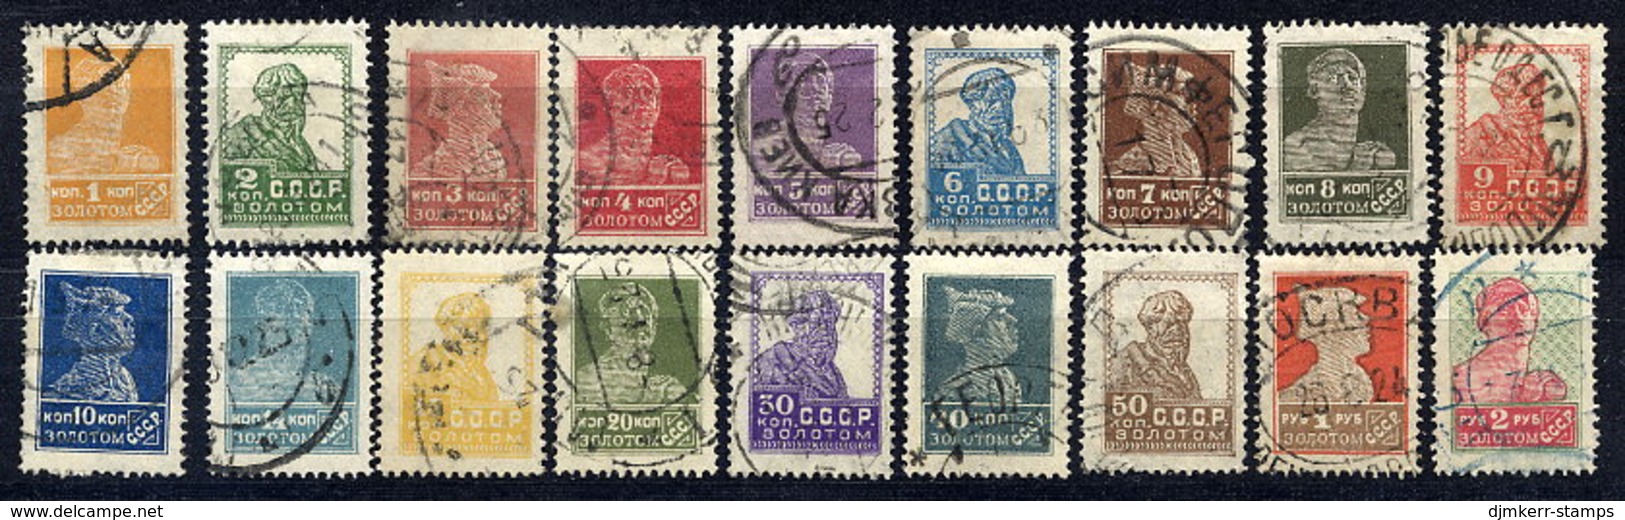 SOVIET UNION 1924-25 Definitive Complete To 2 R. Without Watermark Perforated 14½:14¾, Used.  Michel 242 I A - 259 I A. - Usati